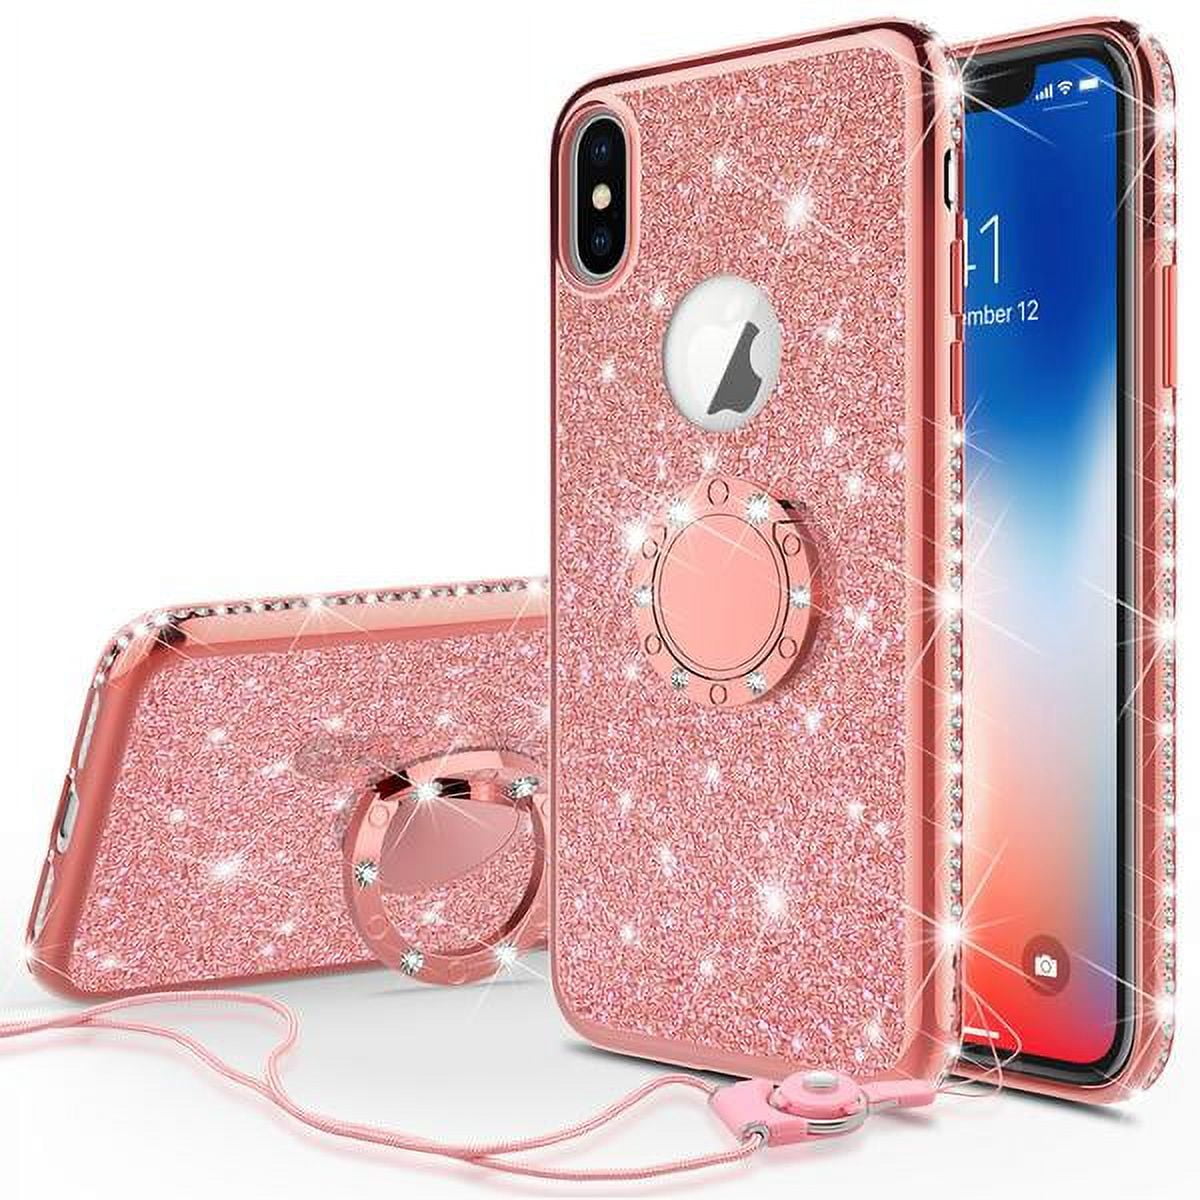 iPhone X/XS Case - Wallet Phone Case - Casebus Wallet Phone Case, Ring  Holder, Credit Card Slots, Zipper Pocket, Premium Leather Purse, Shockproof  Cover - OMER - Casebus